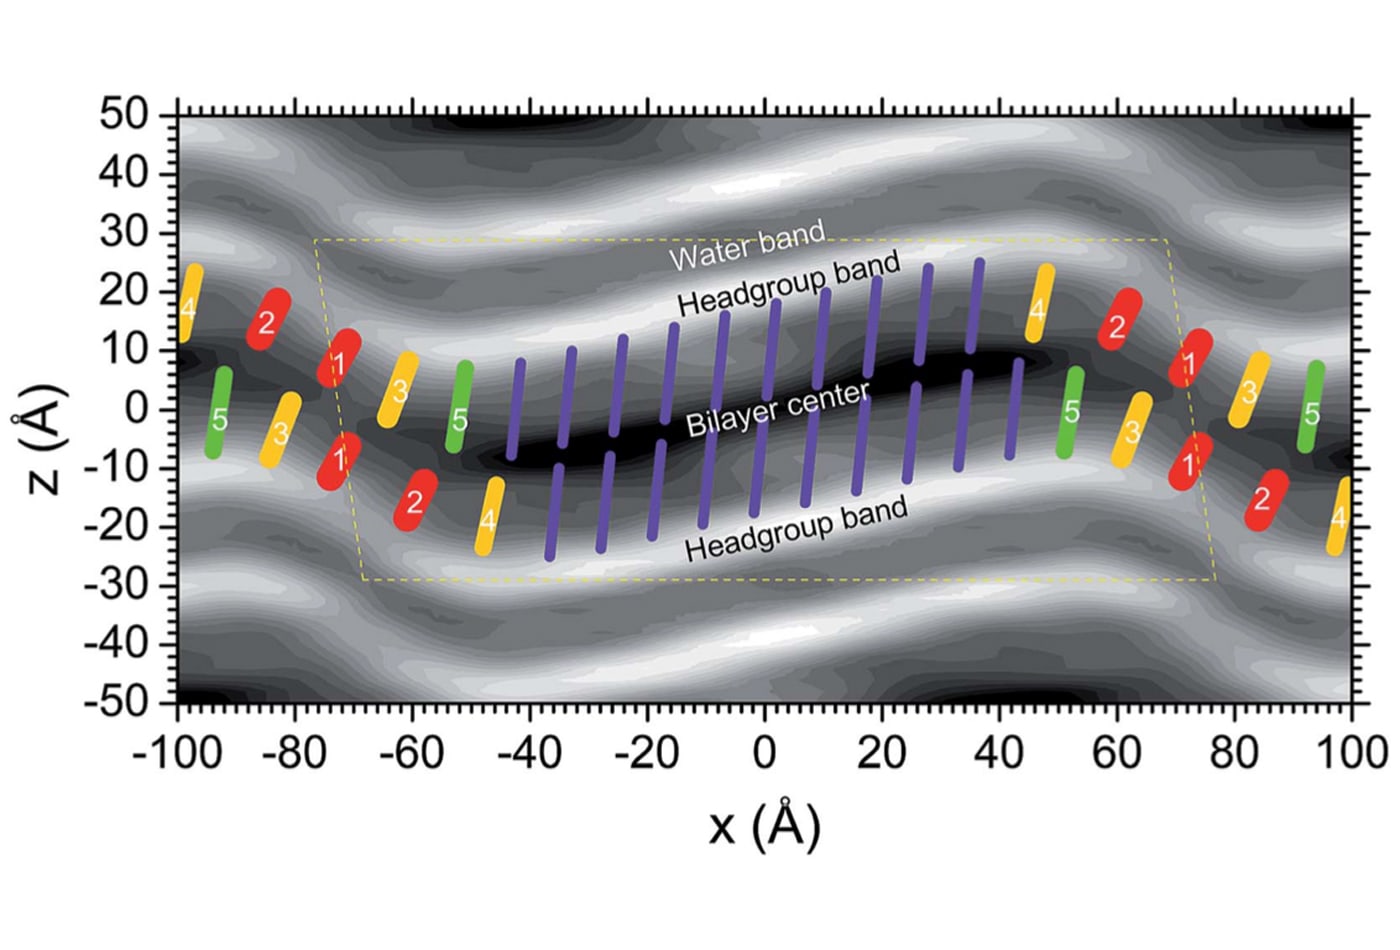 Membrane ripple phase structure